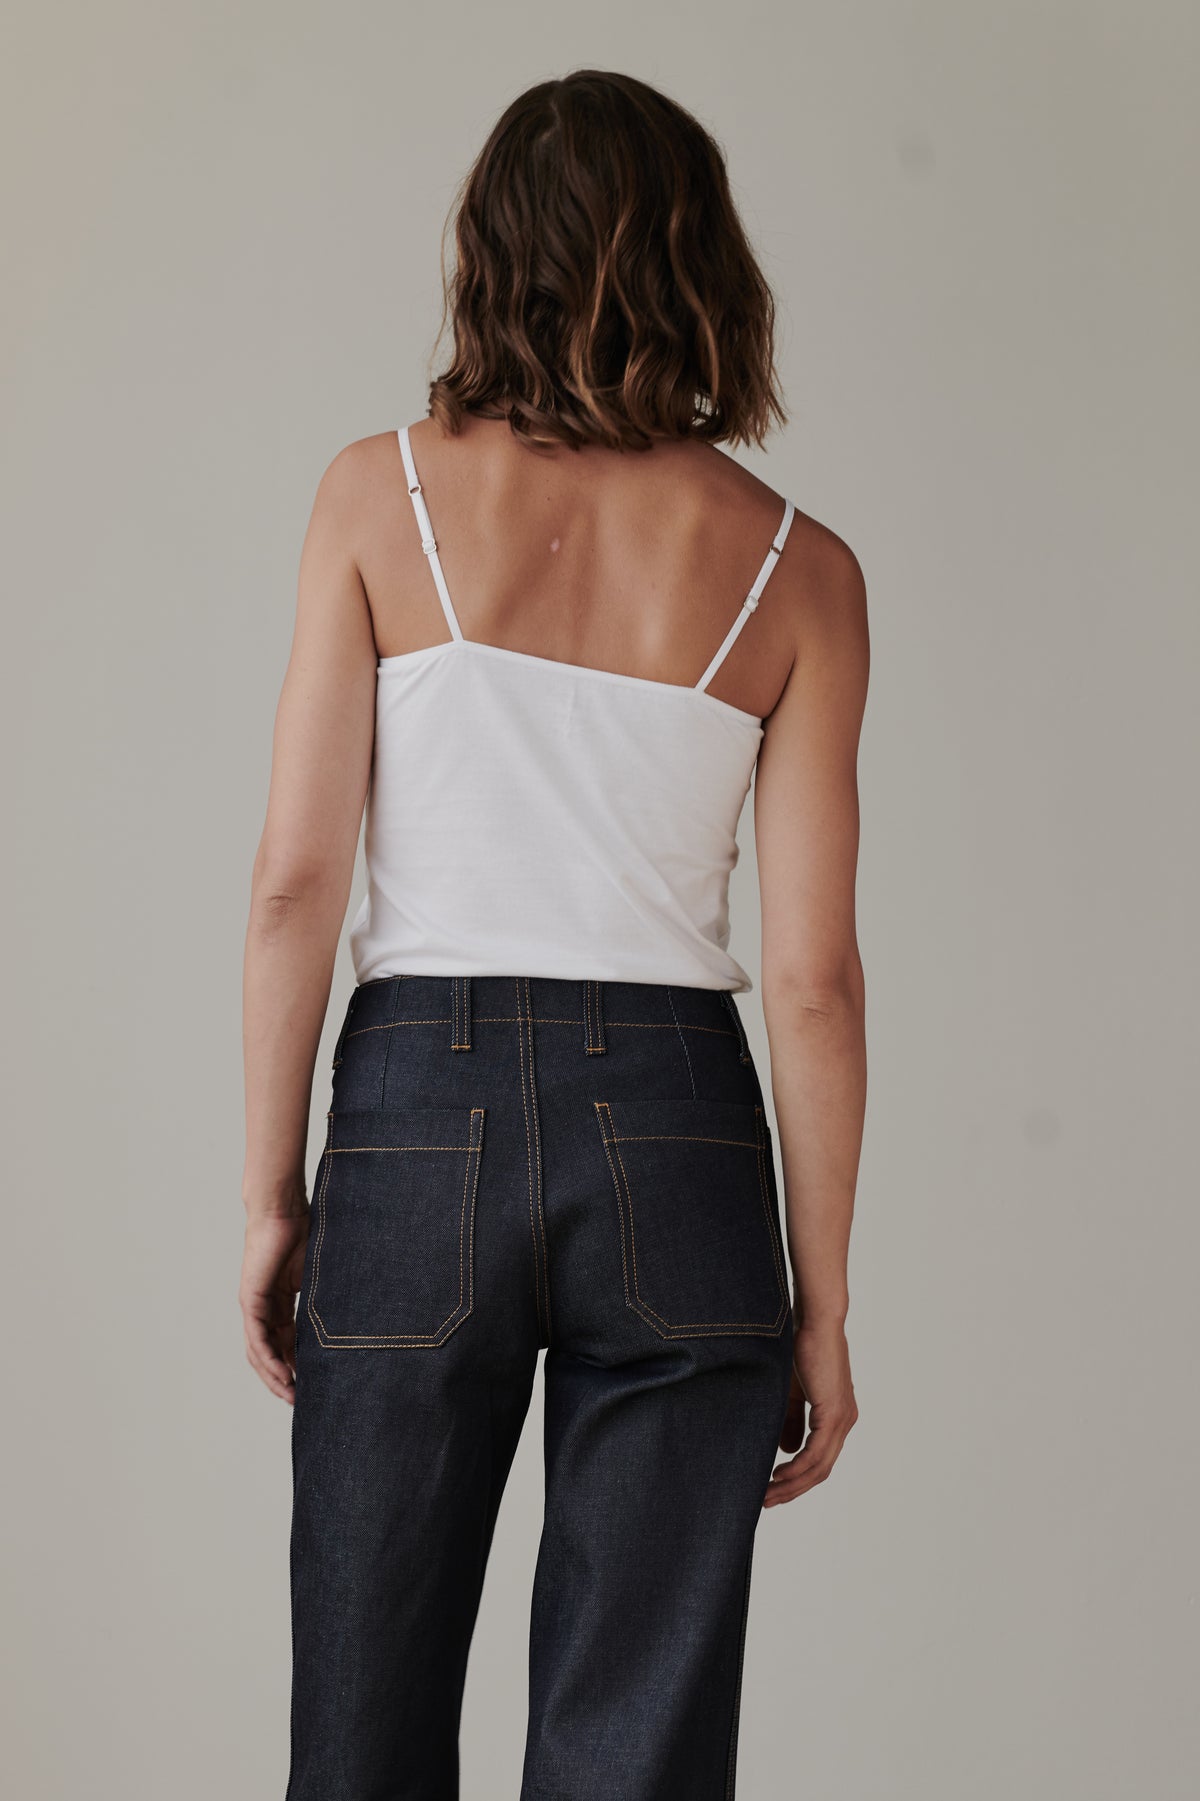 
            The back of female wearing camisole in white tucked into work jeans in indigo